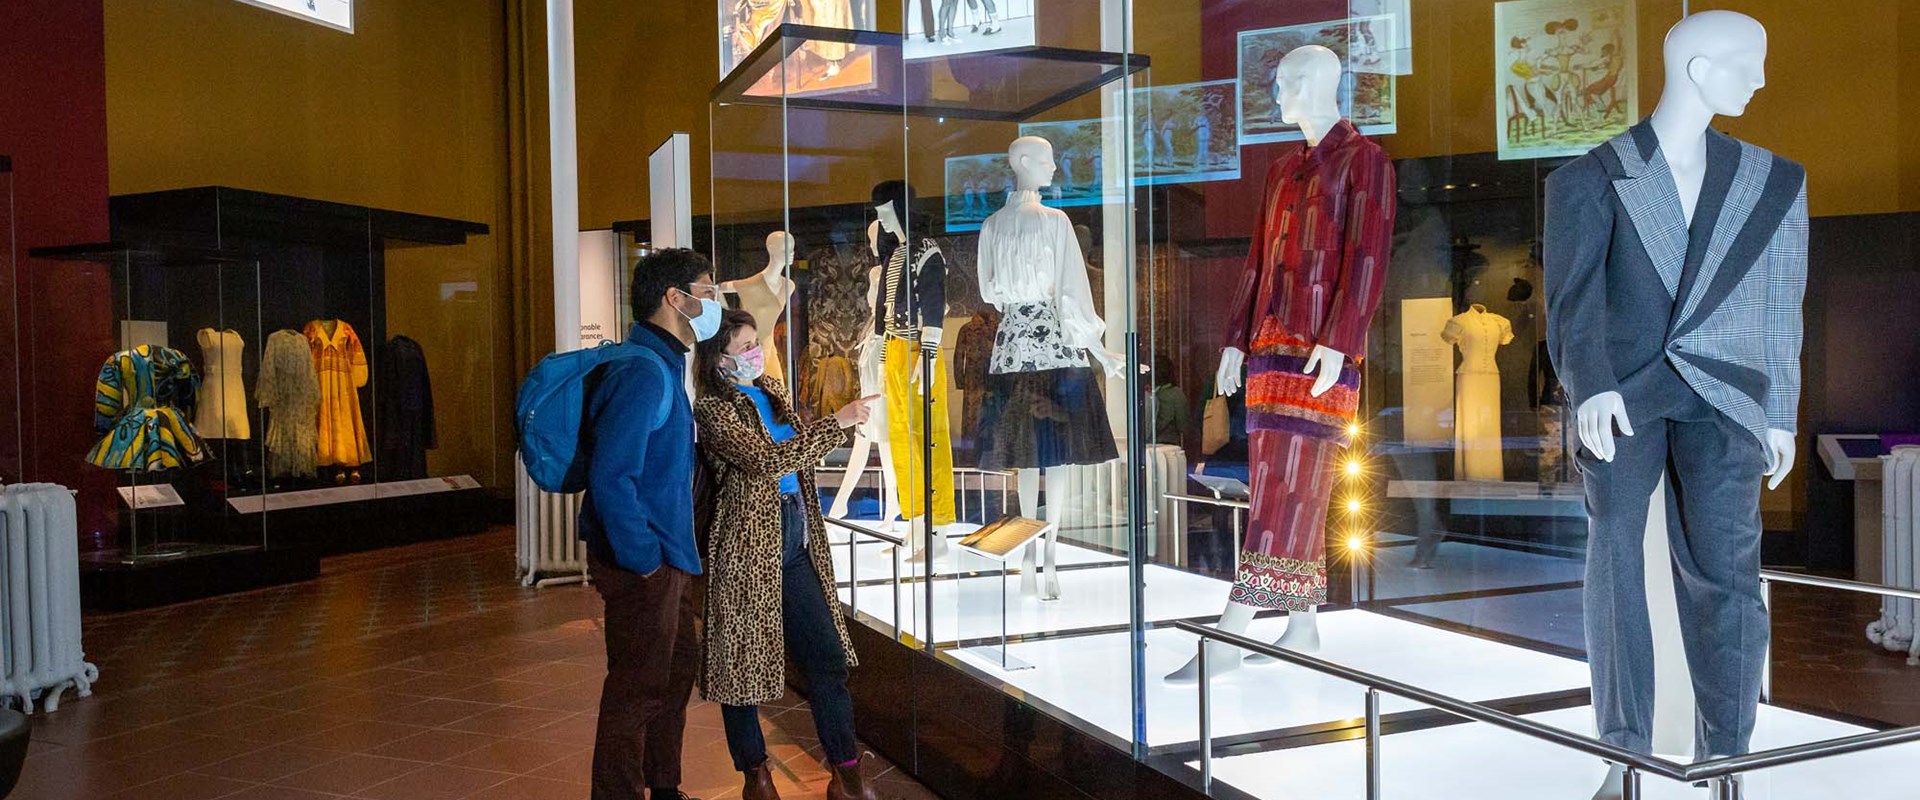 Two visitors wearing masks look at mannequins in glass cases in the Fashion and Style gallery